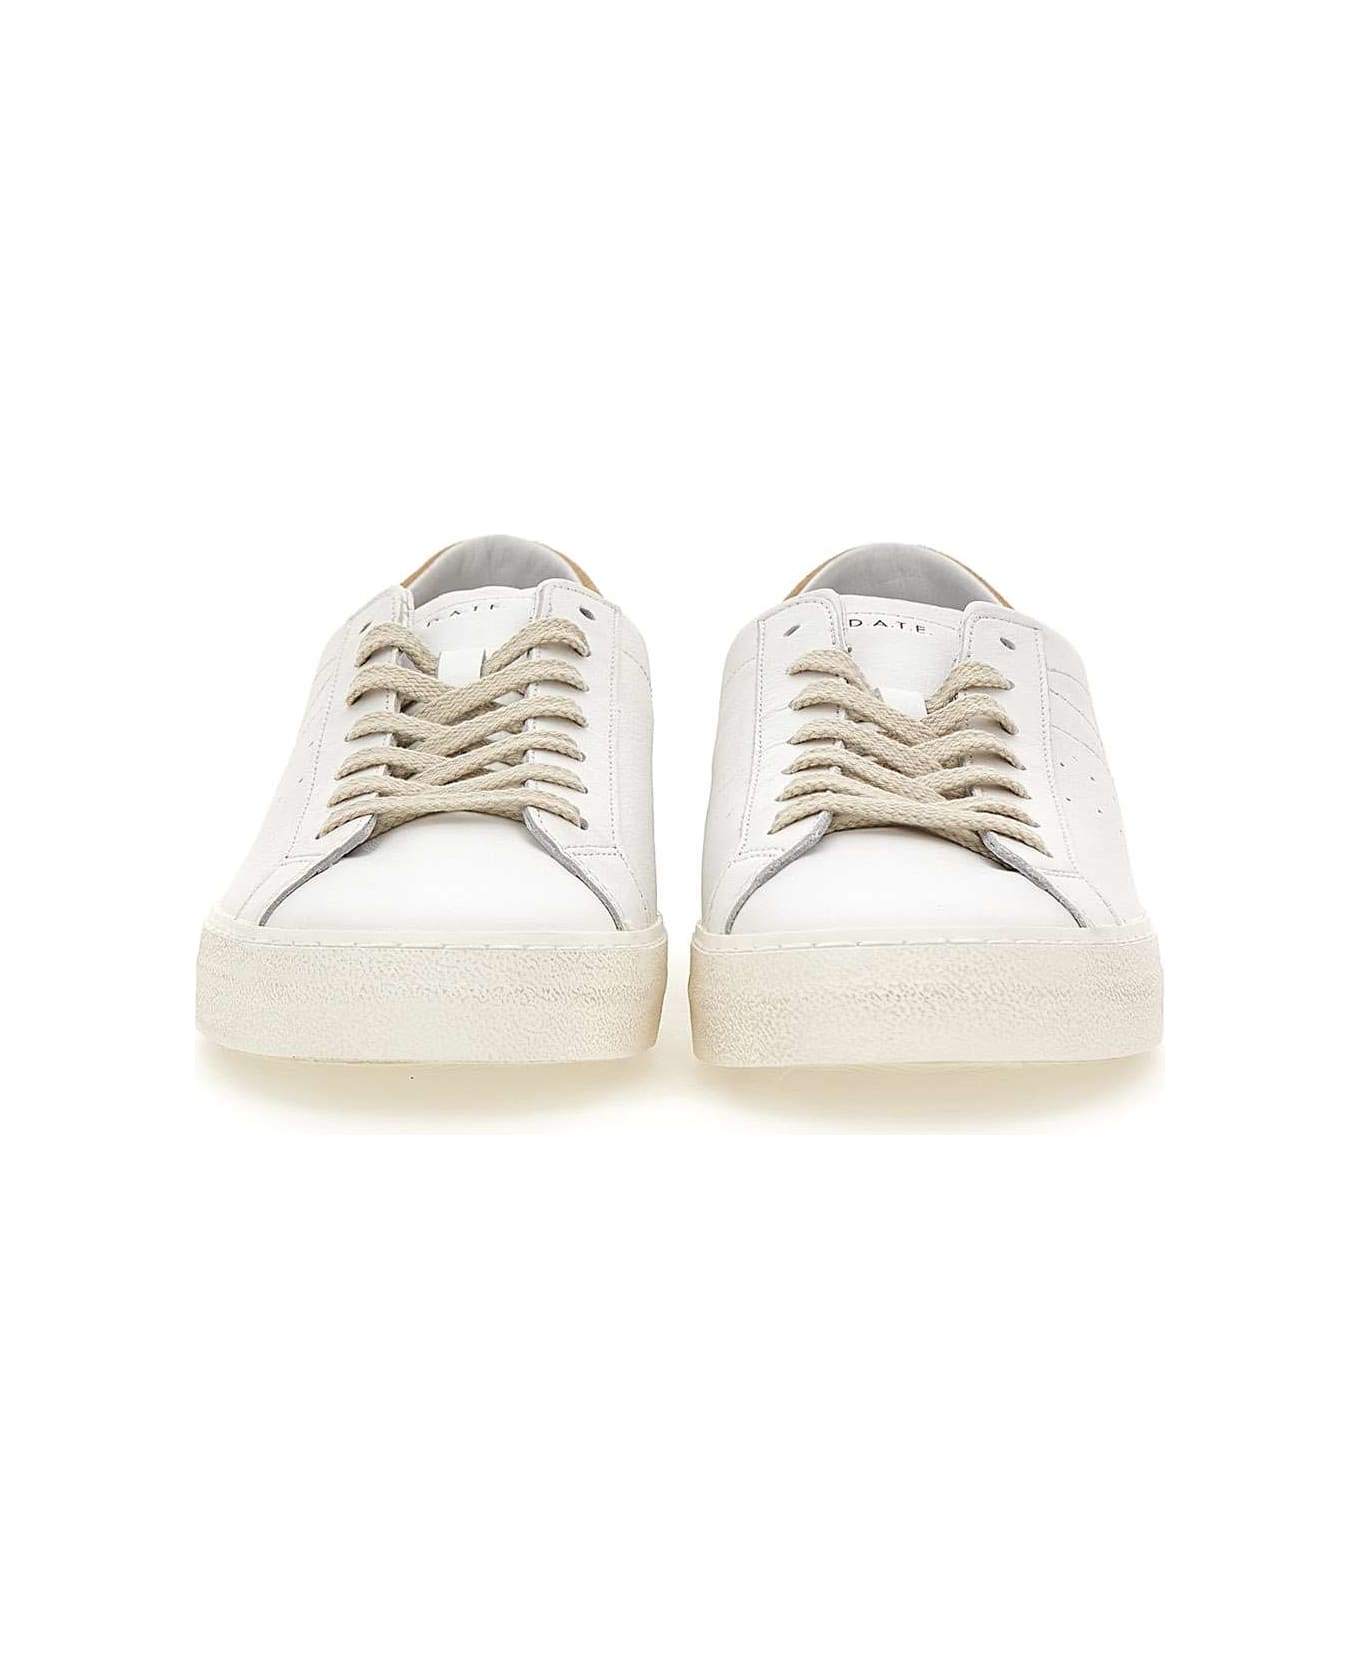 D.A.T.E. "hillow Vintage Calf" Leather Sneakers - WHITE